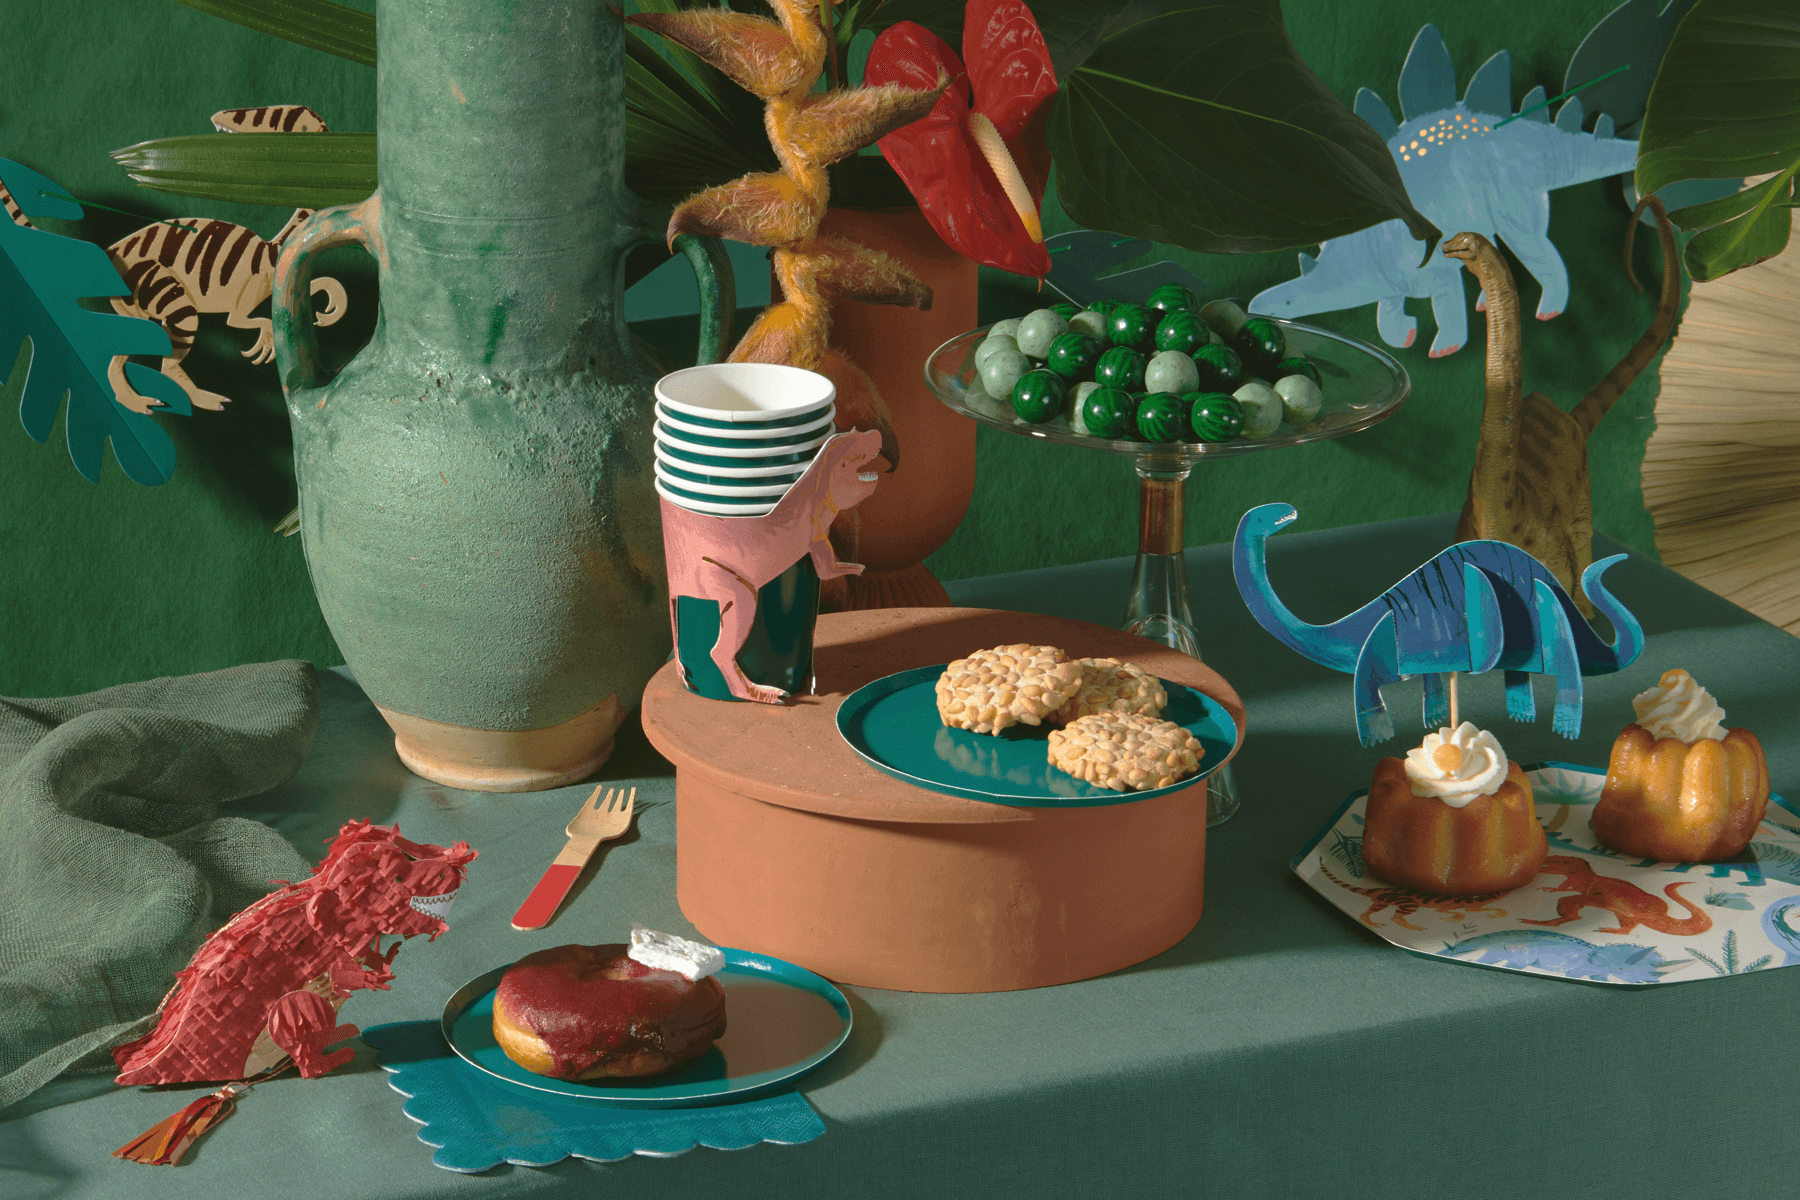 Party scene featuring desserts and dinosaur-themed tableware lie cups and cardboard cutouts.